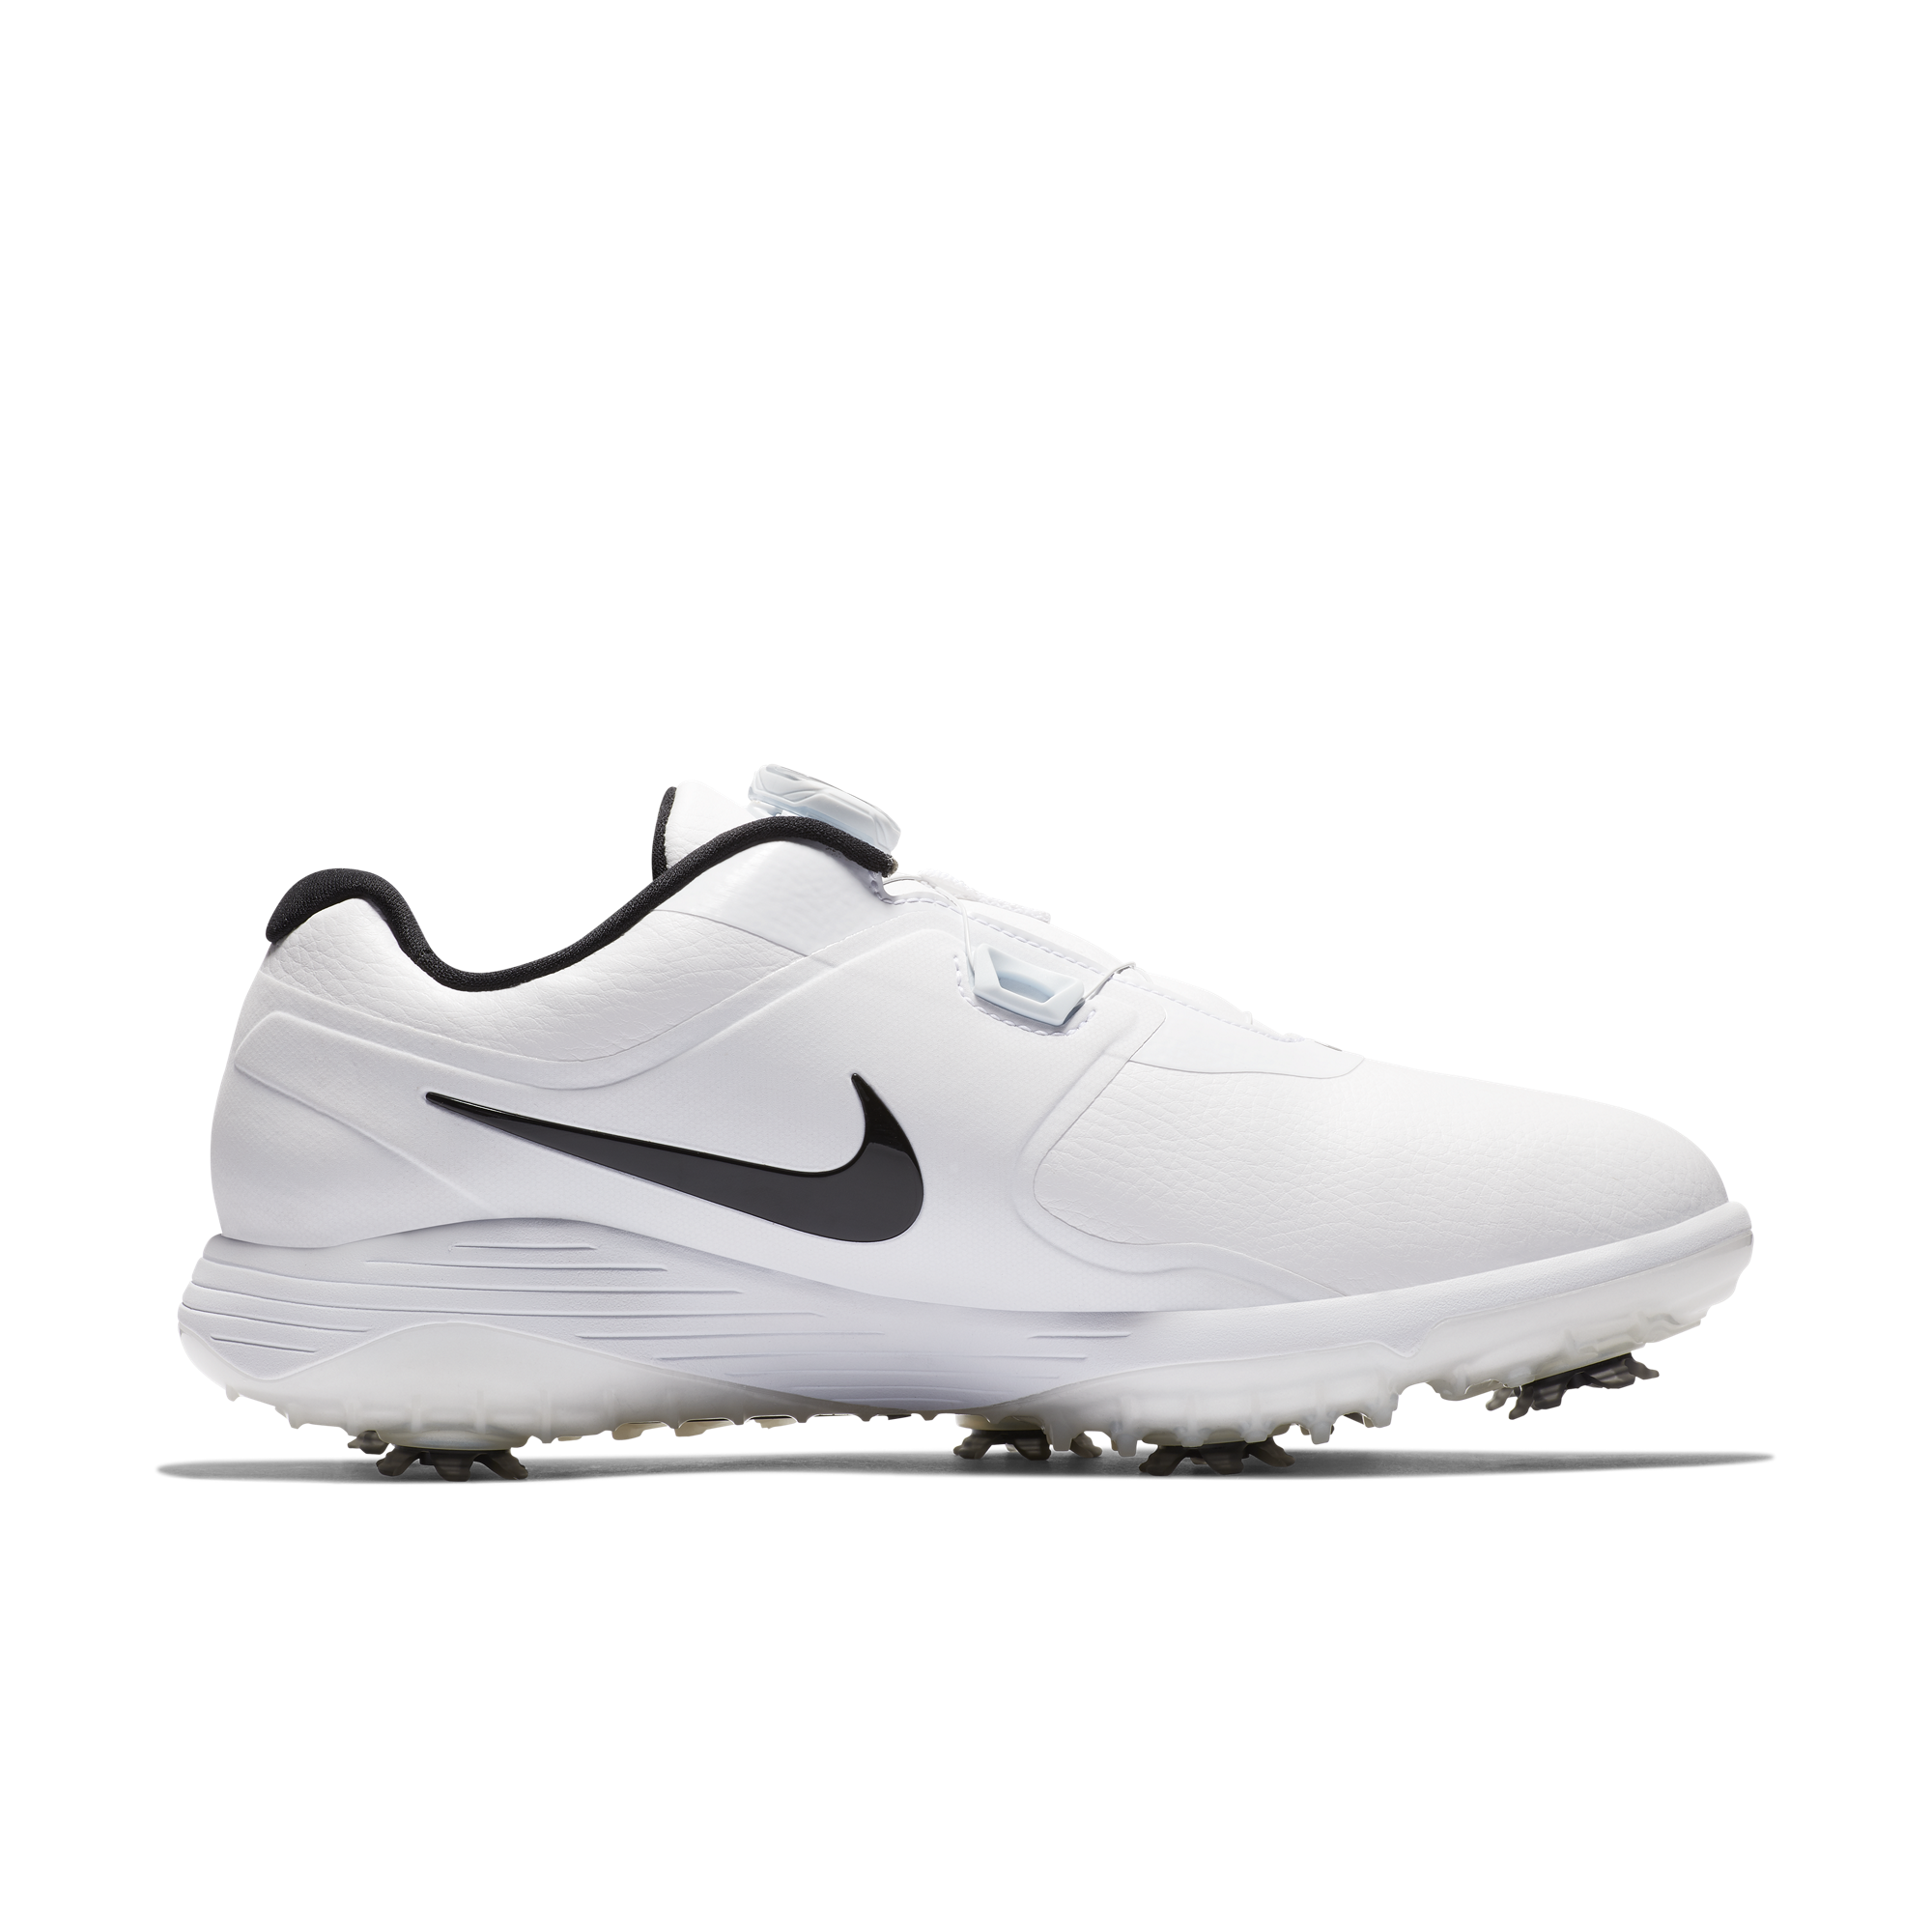 nike golf shoes with boa